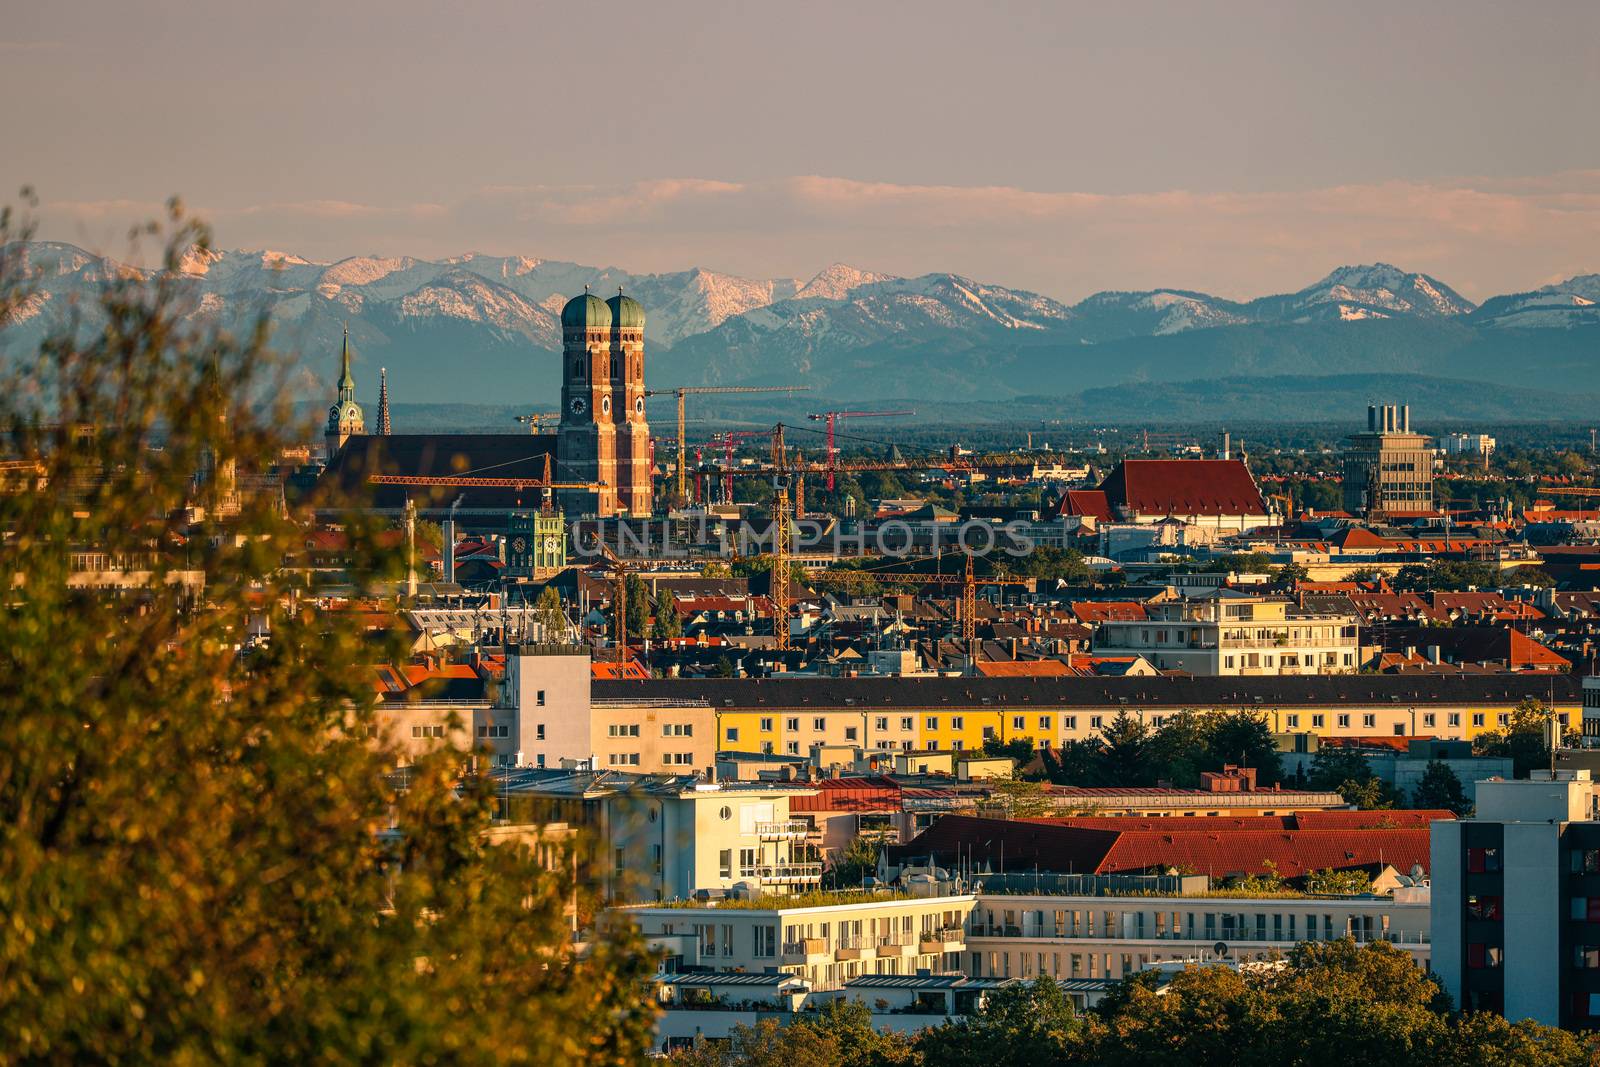 Landmark Frauenkirche in Munich with Alps Panorama by COffe